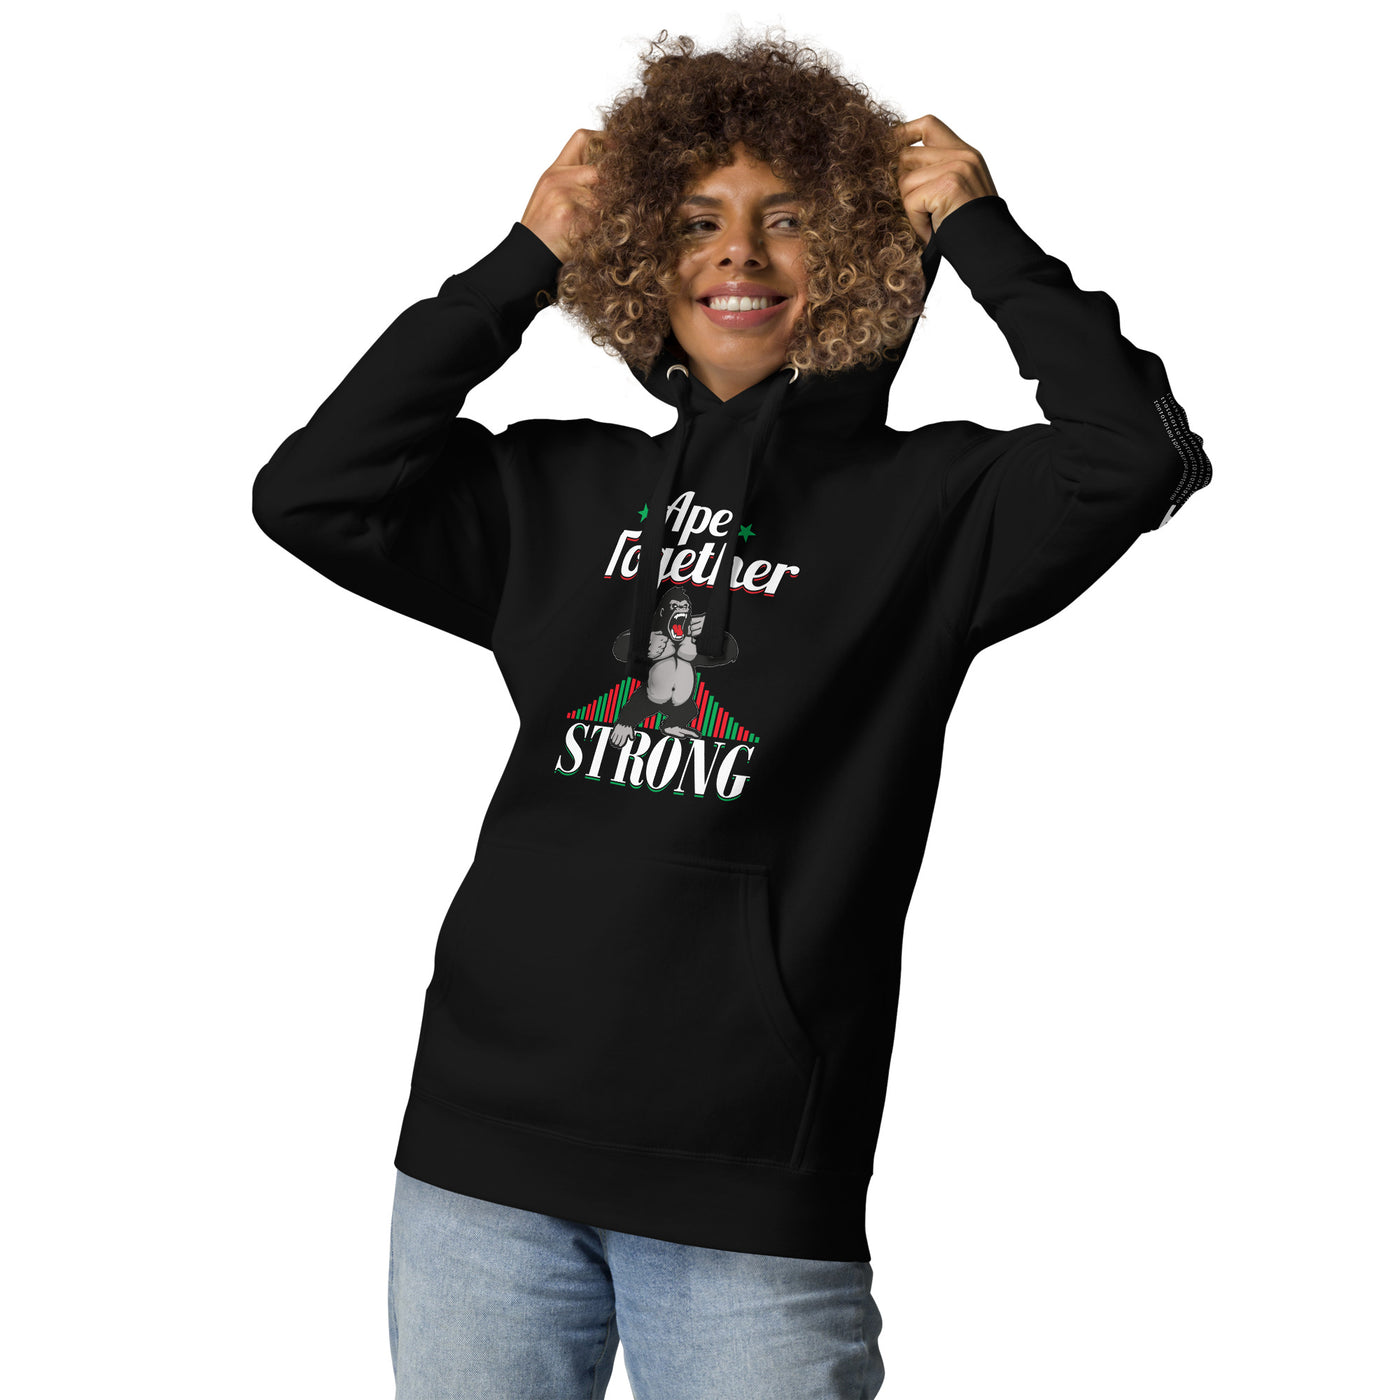 Ape together strong - Unisex Hoodie